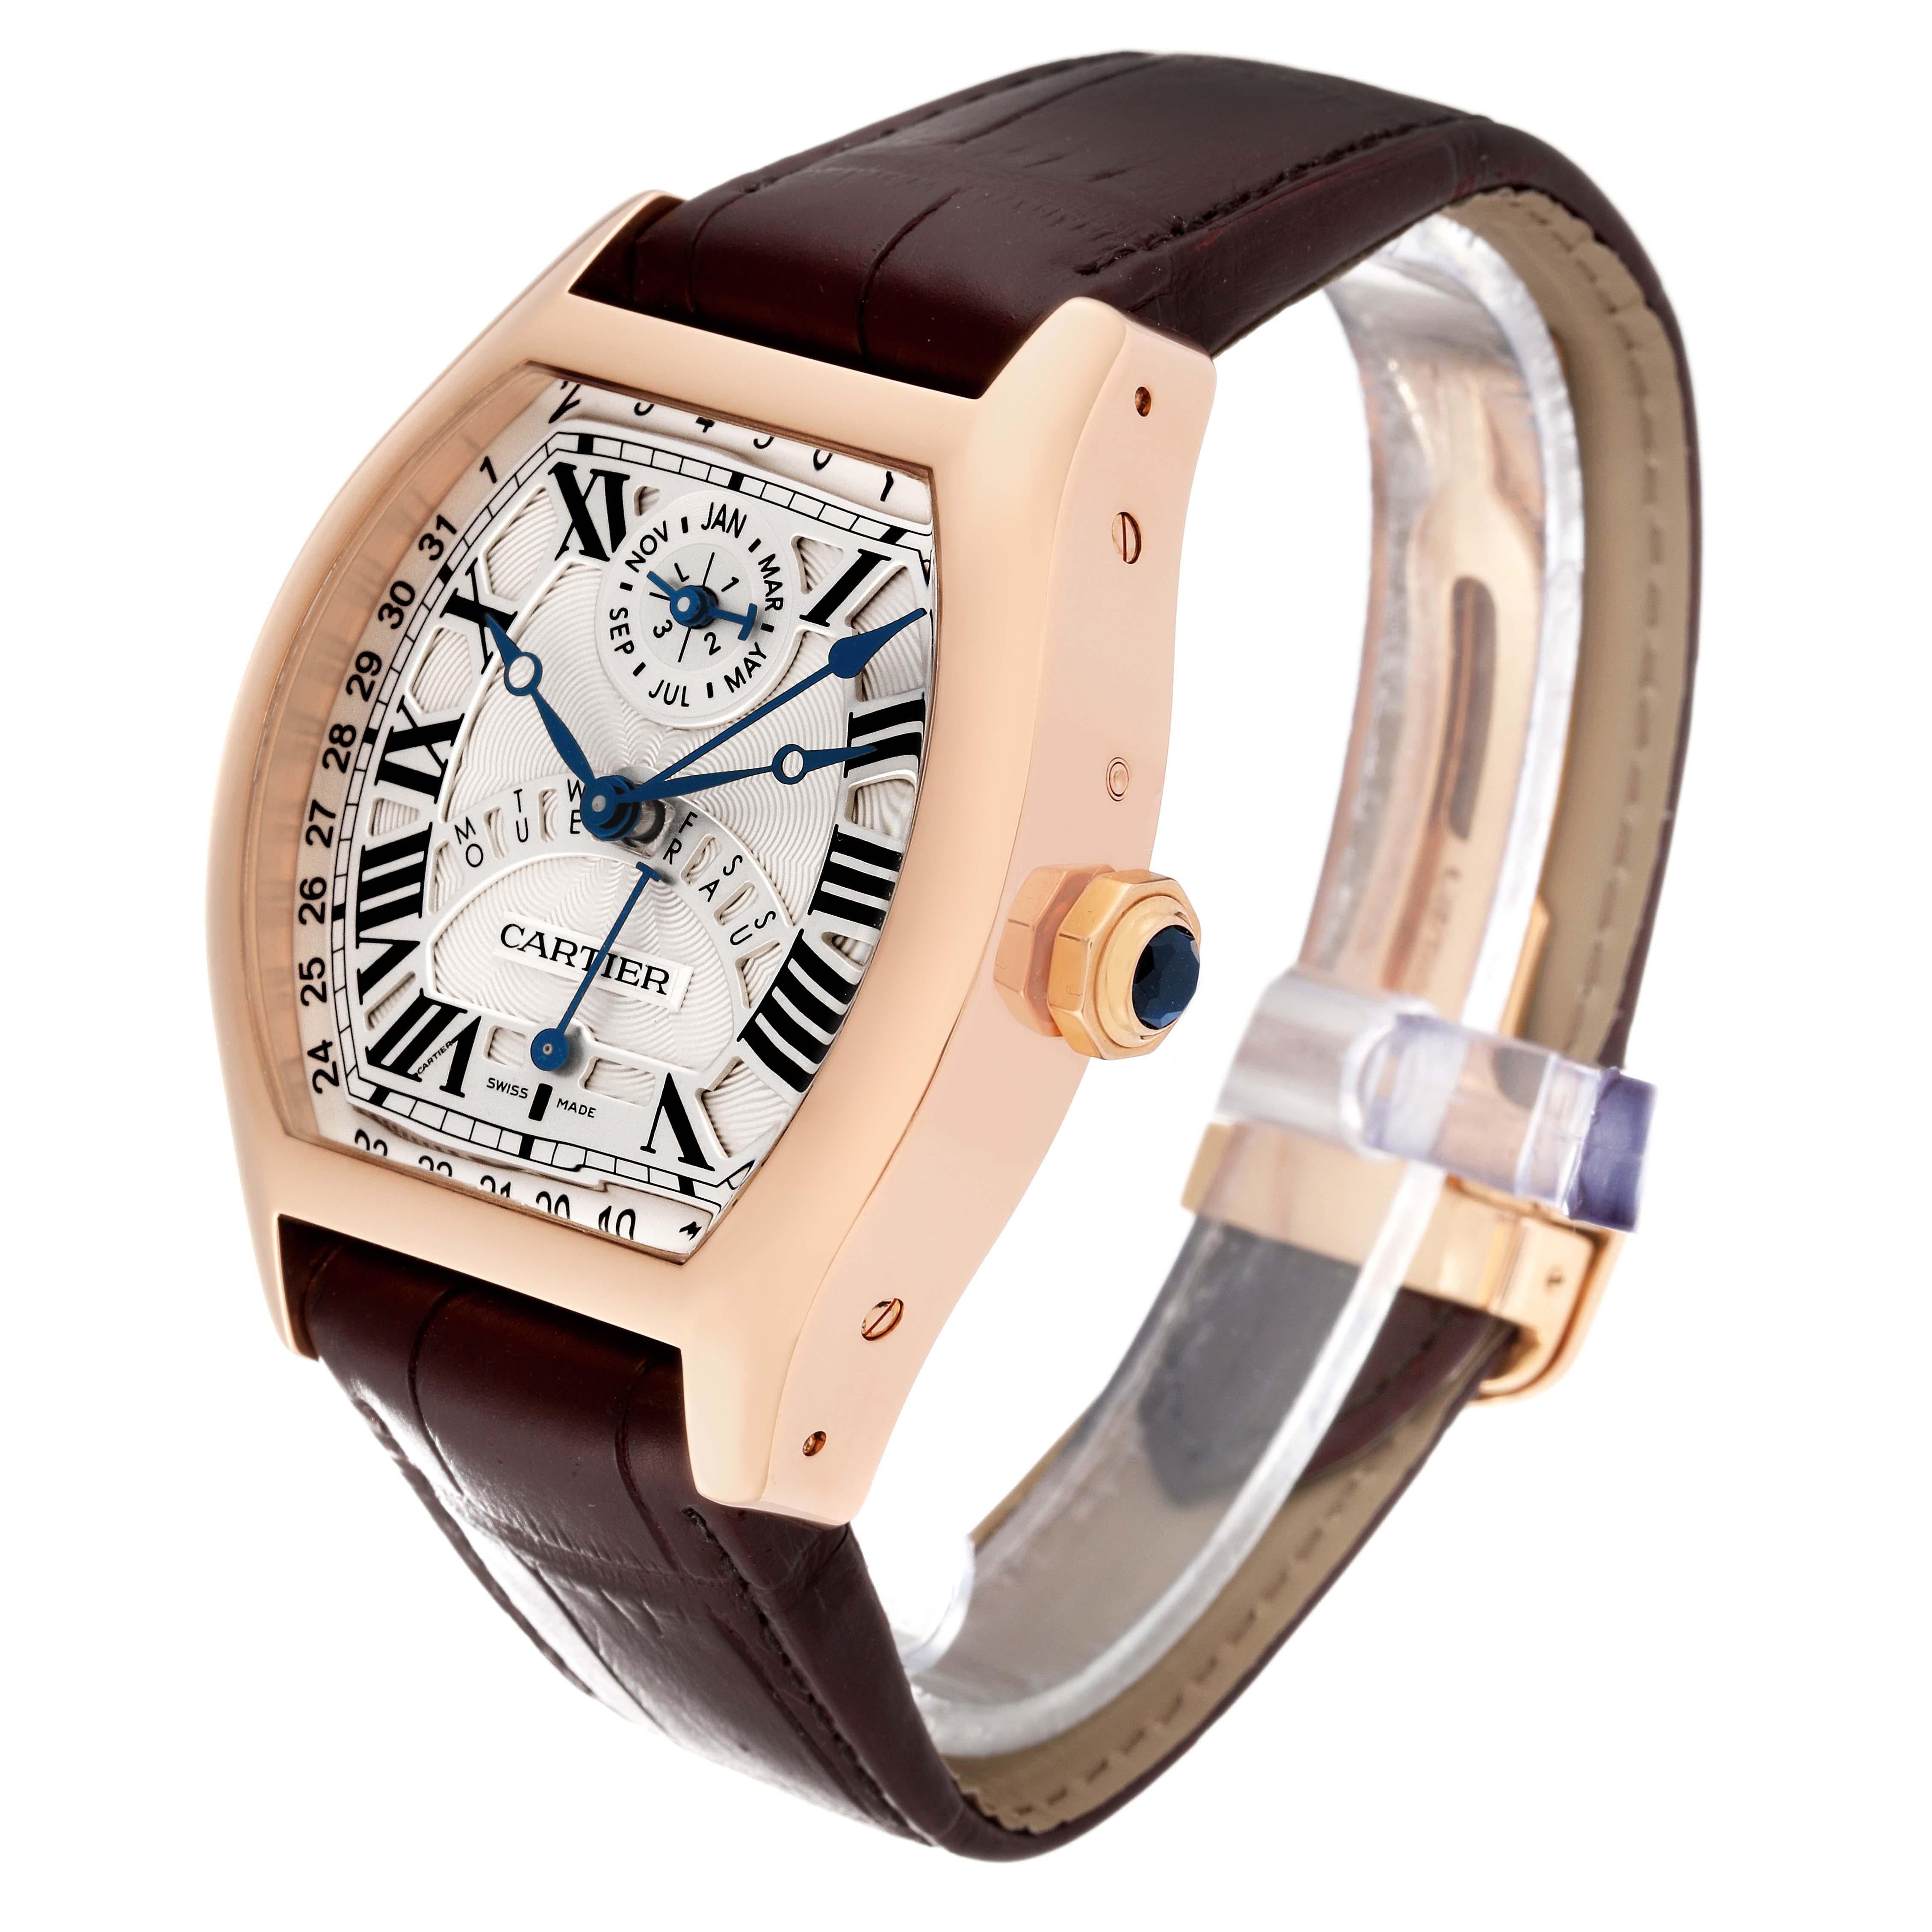 Cartier Tortue Perpetual Calendar Automatic Rose Gold Mens Watch W1580045 In Excellent Condition For Sale In Atlanta, GA